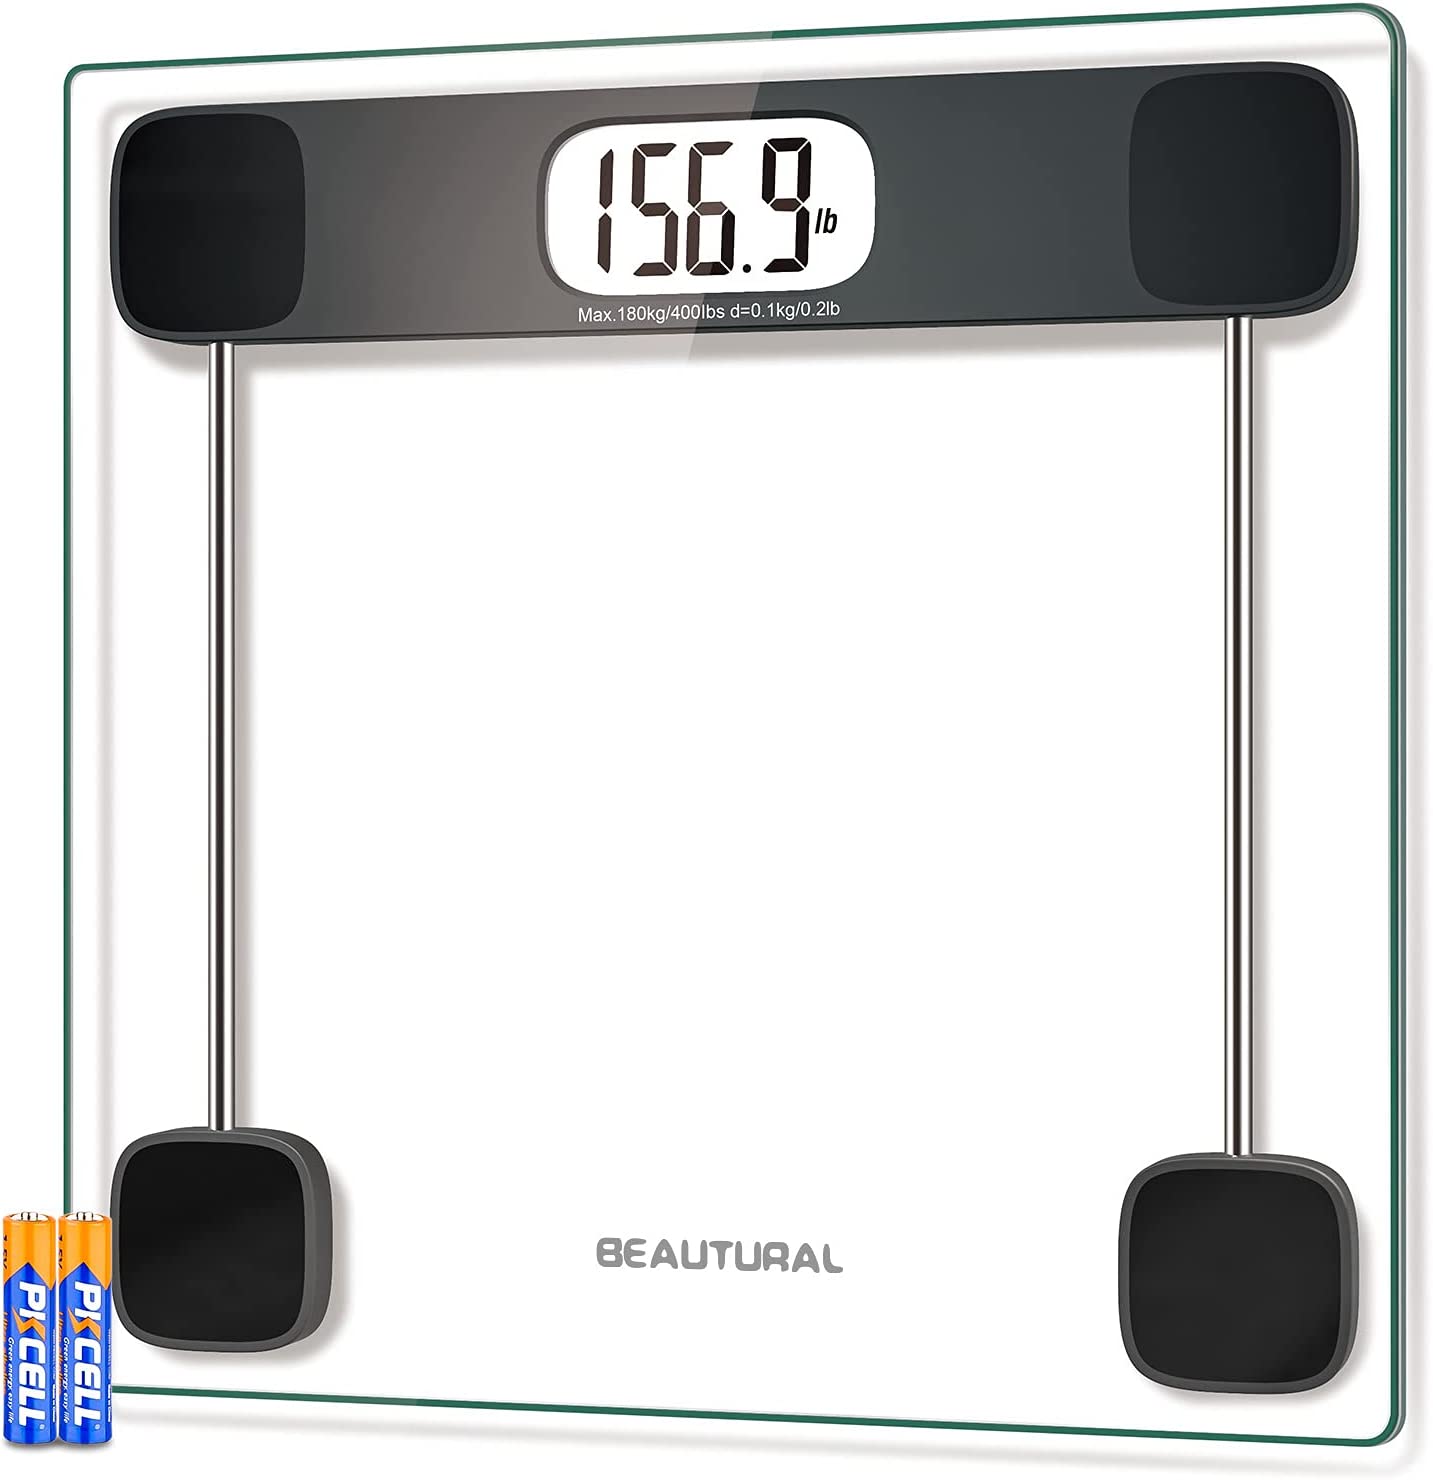 BEAUTURAL Digital Bathroom Scale for Body Weight, Accurate Weighing Scale High Precision Bath Scale for People with Step-On Technology, LCD Display, 400lbs, Batteries and Tape Measure Included